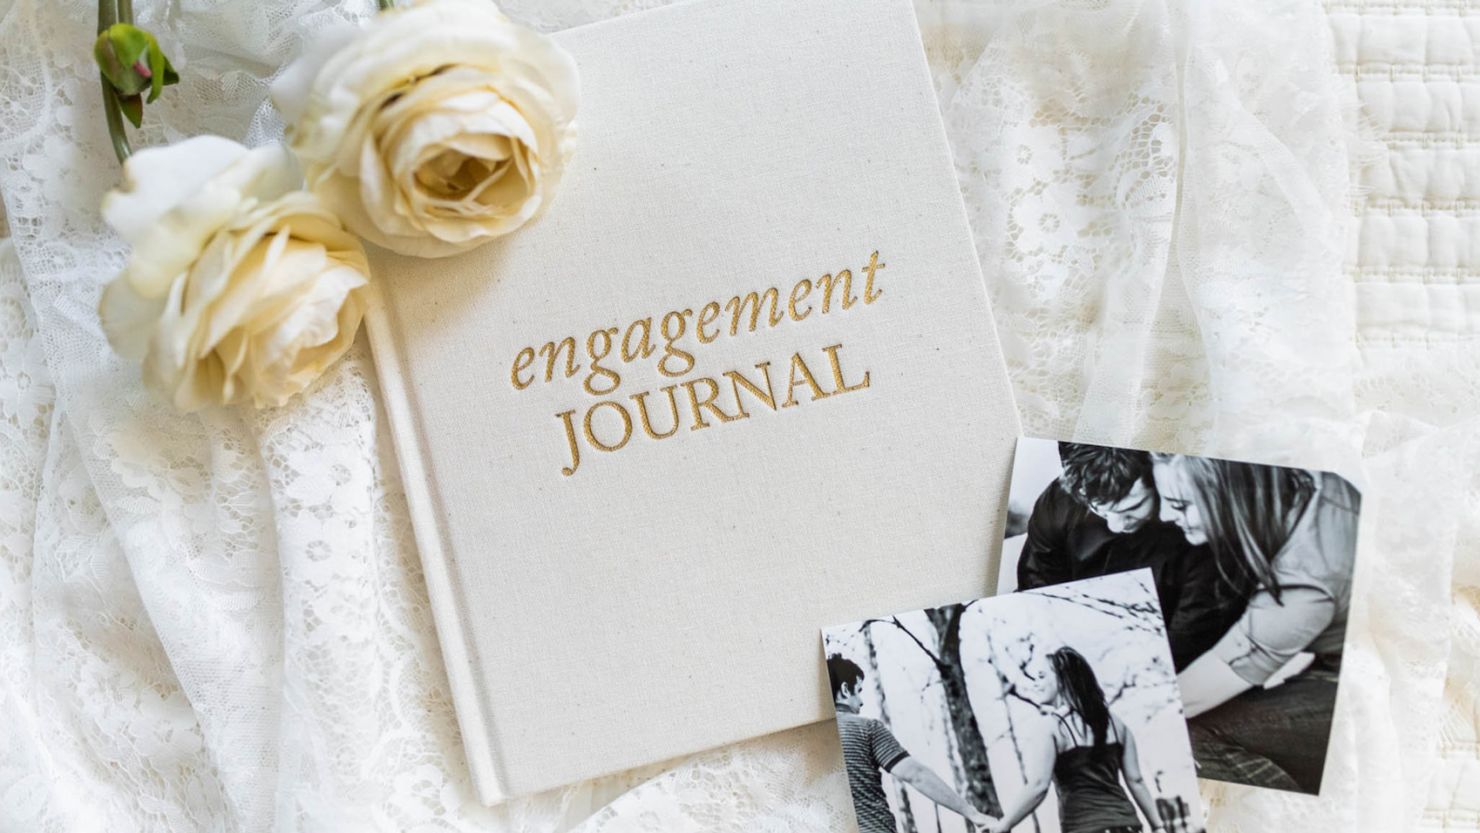 25 Engagement Gifts For Couples That Are Getting Married - Weddingomania